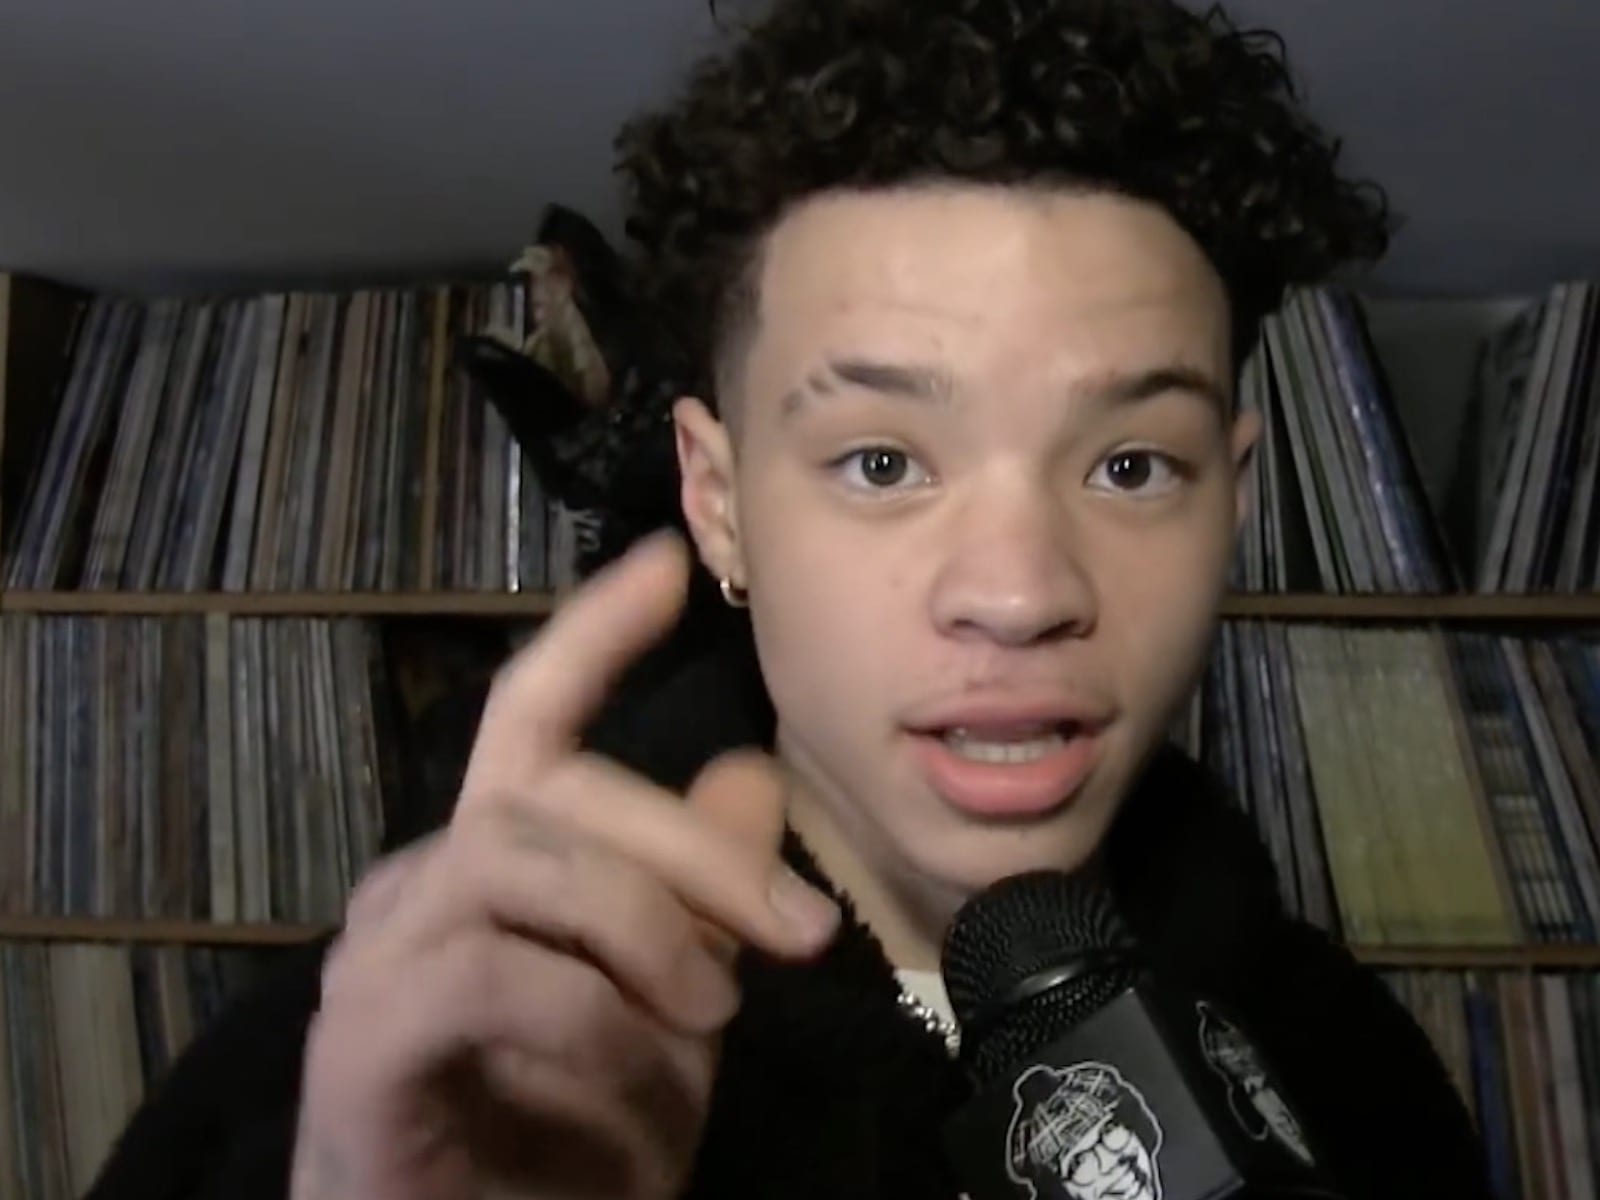 Lil Mosey Announces He's Done W/ Drugs After Juice WRLD's Death